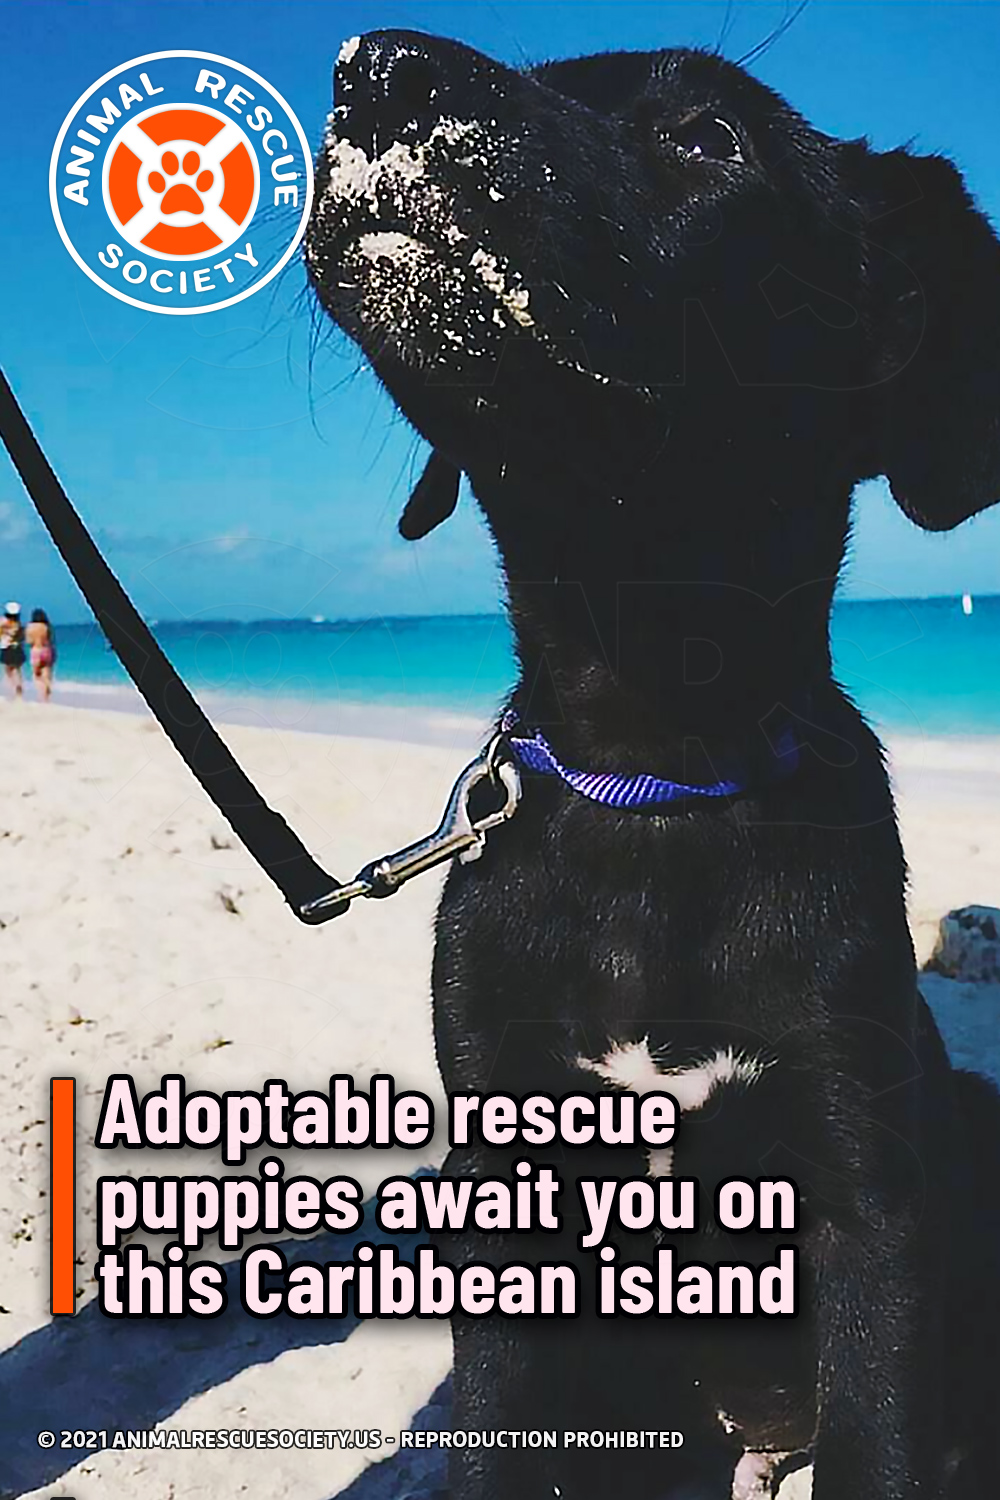 Adoptable rescue puppies await you on this Caribbean island